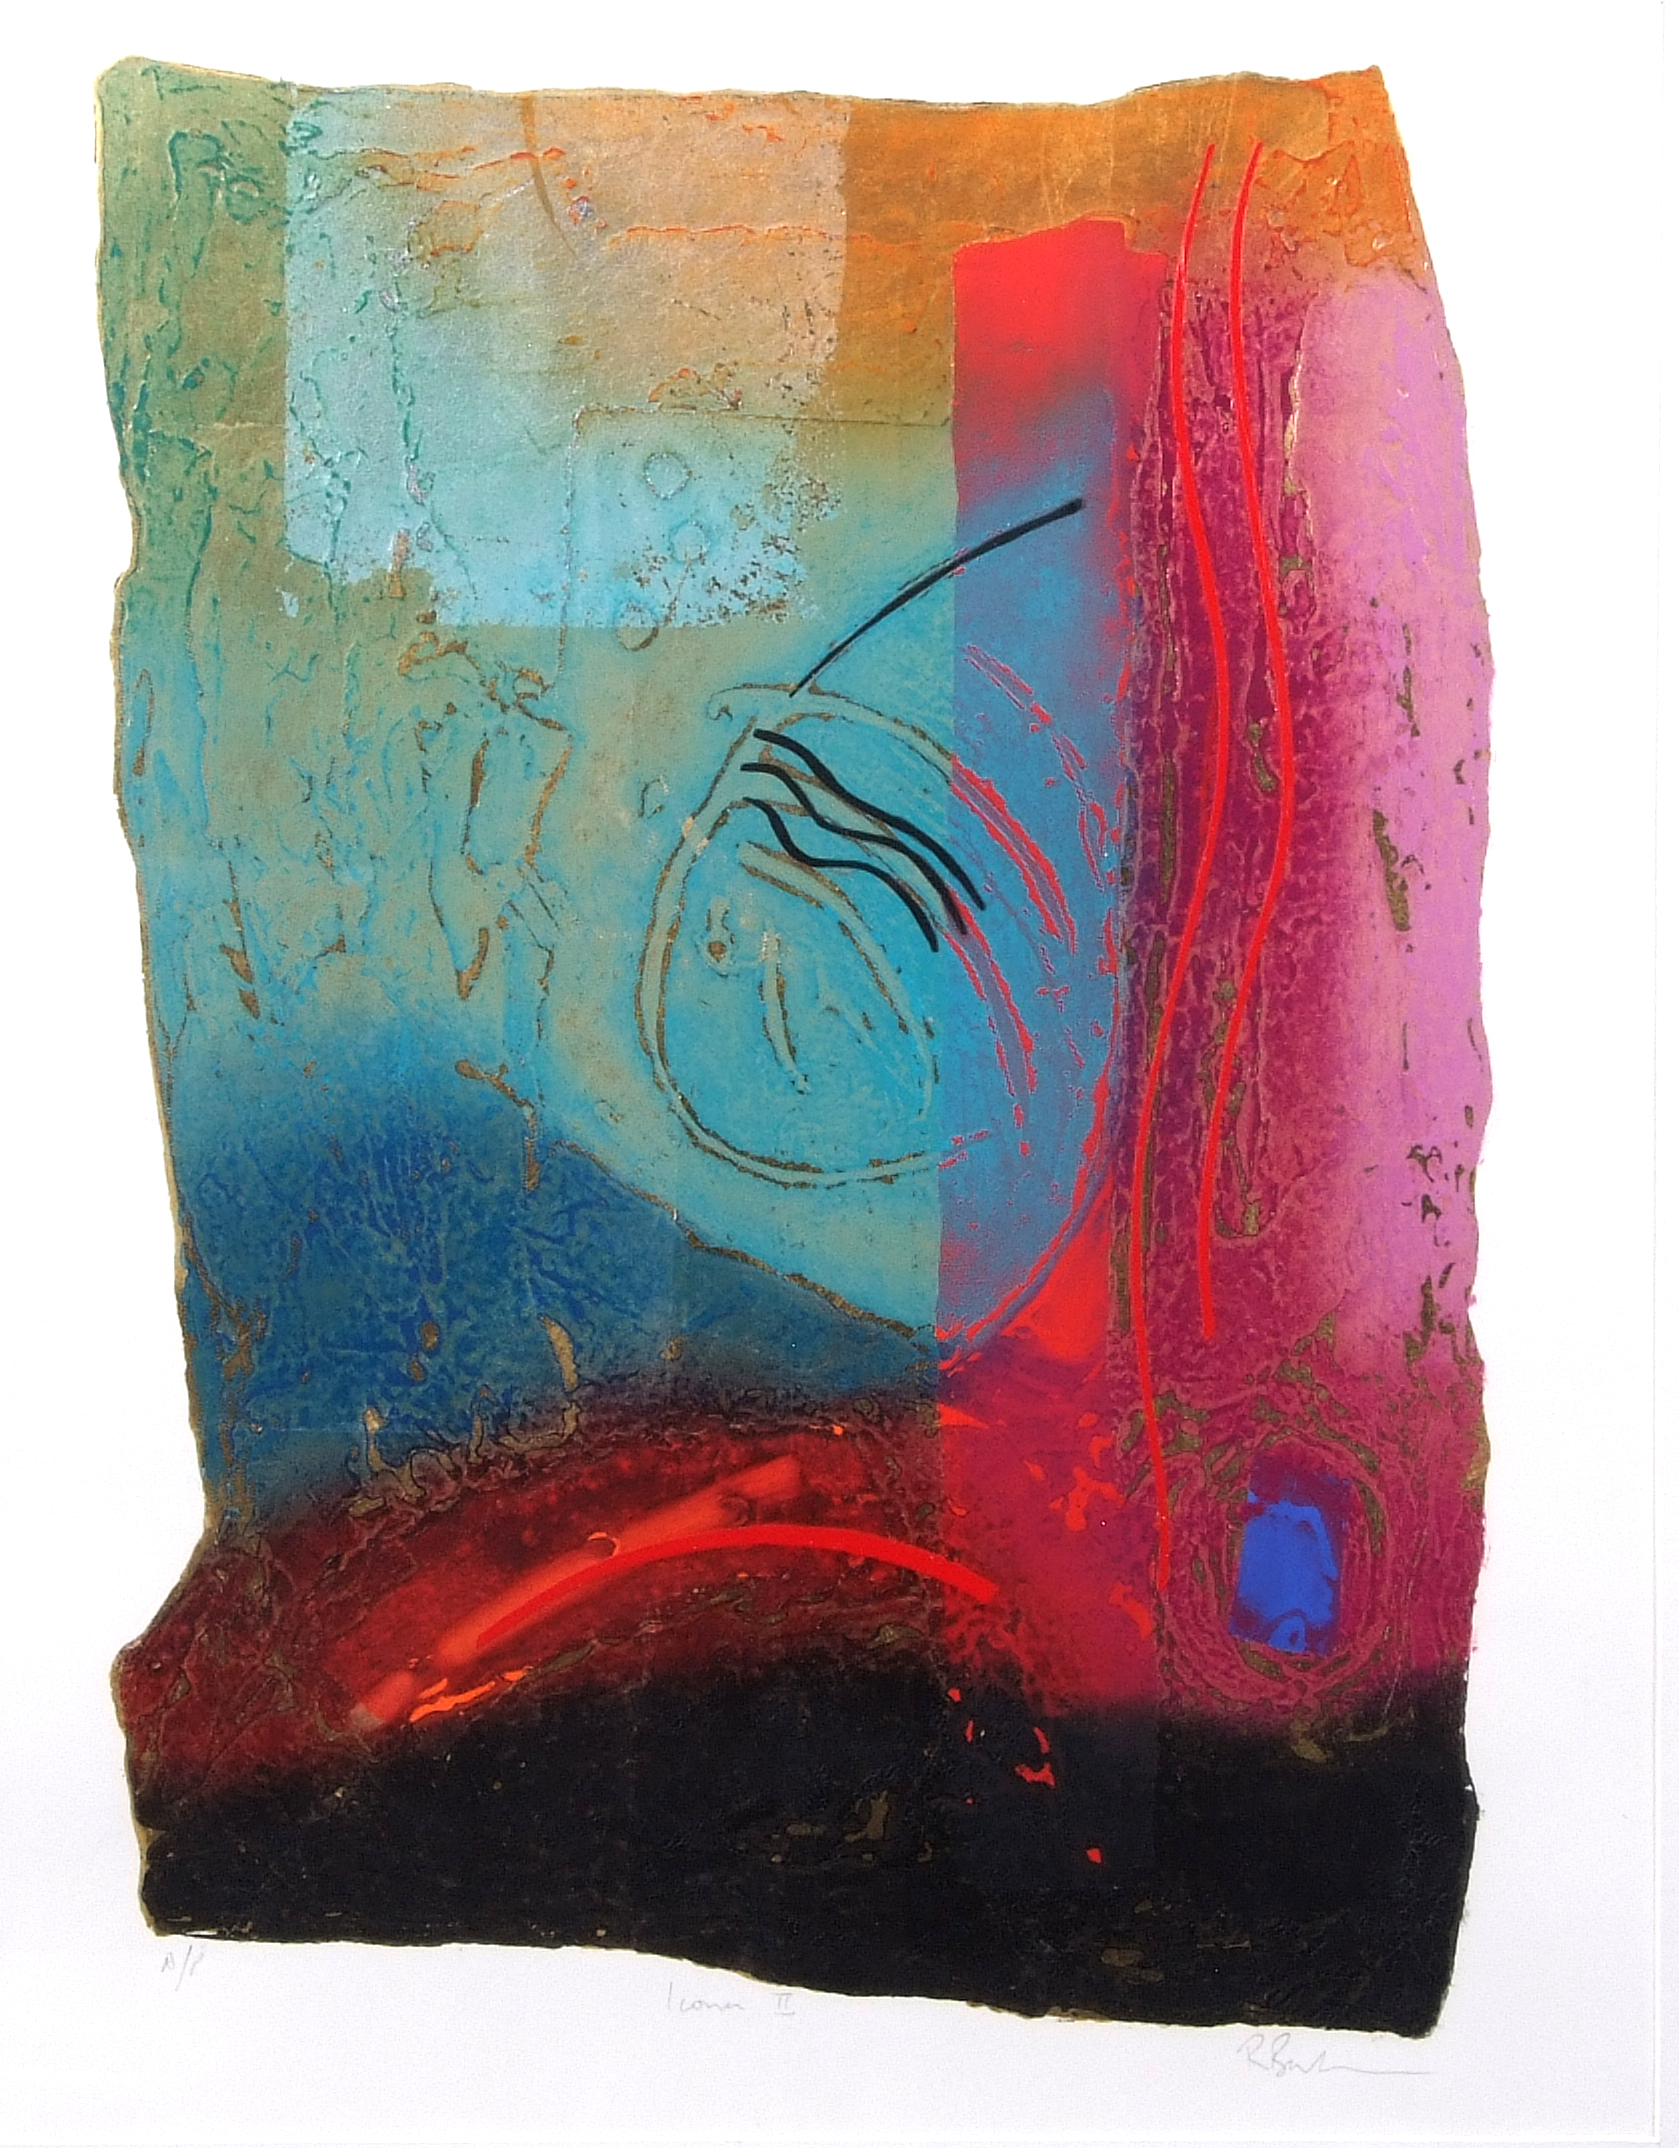 AR R Bali (20th century) "Icona II" mixed media, signed, inscribed AP and further inscribed with